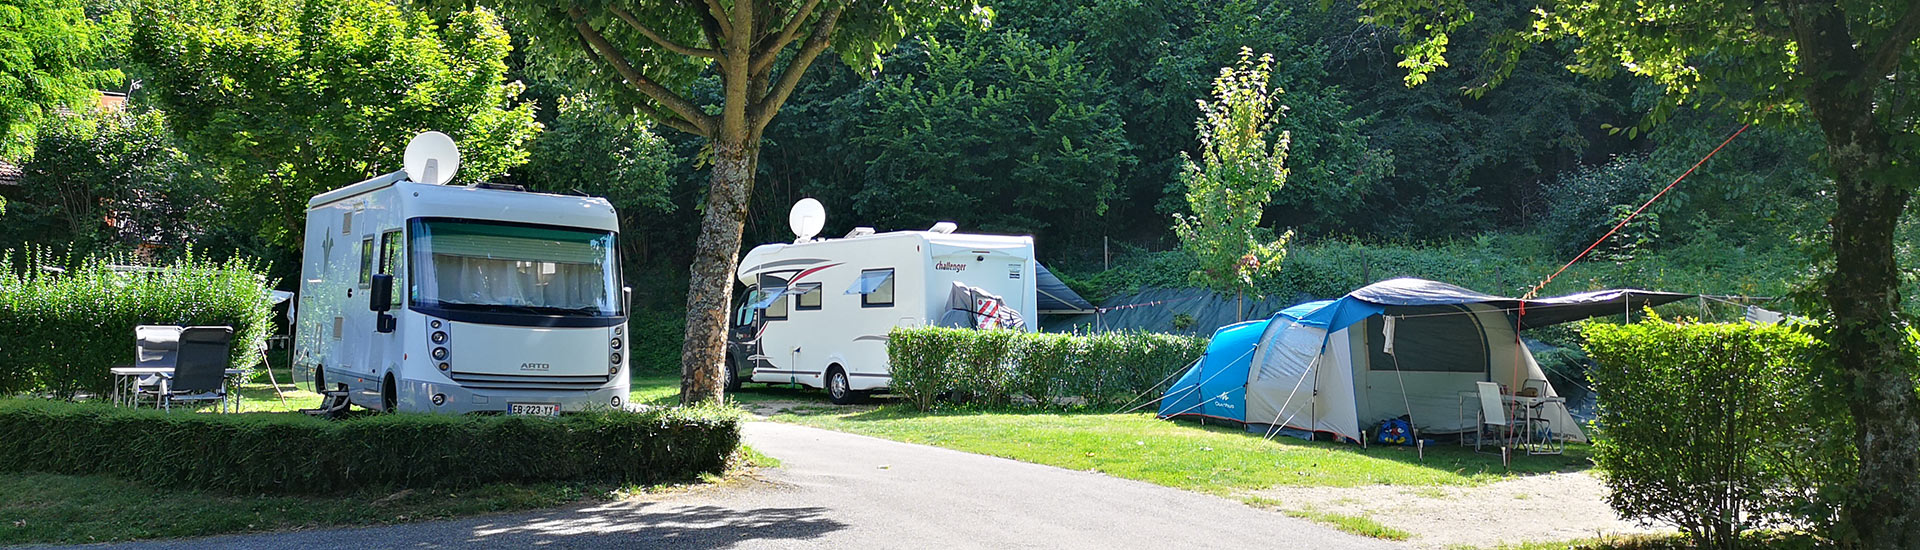 Camping marie france 3 stars at la léchère (aigueblanche), at the gates of the tarentaise and valmorel in savoie